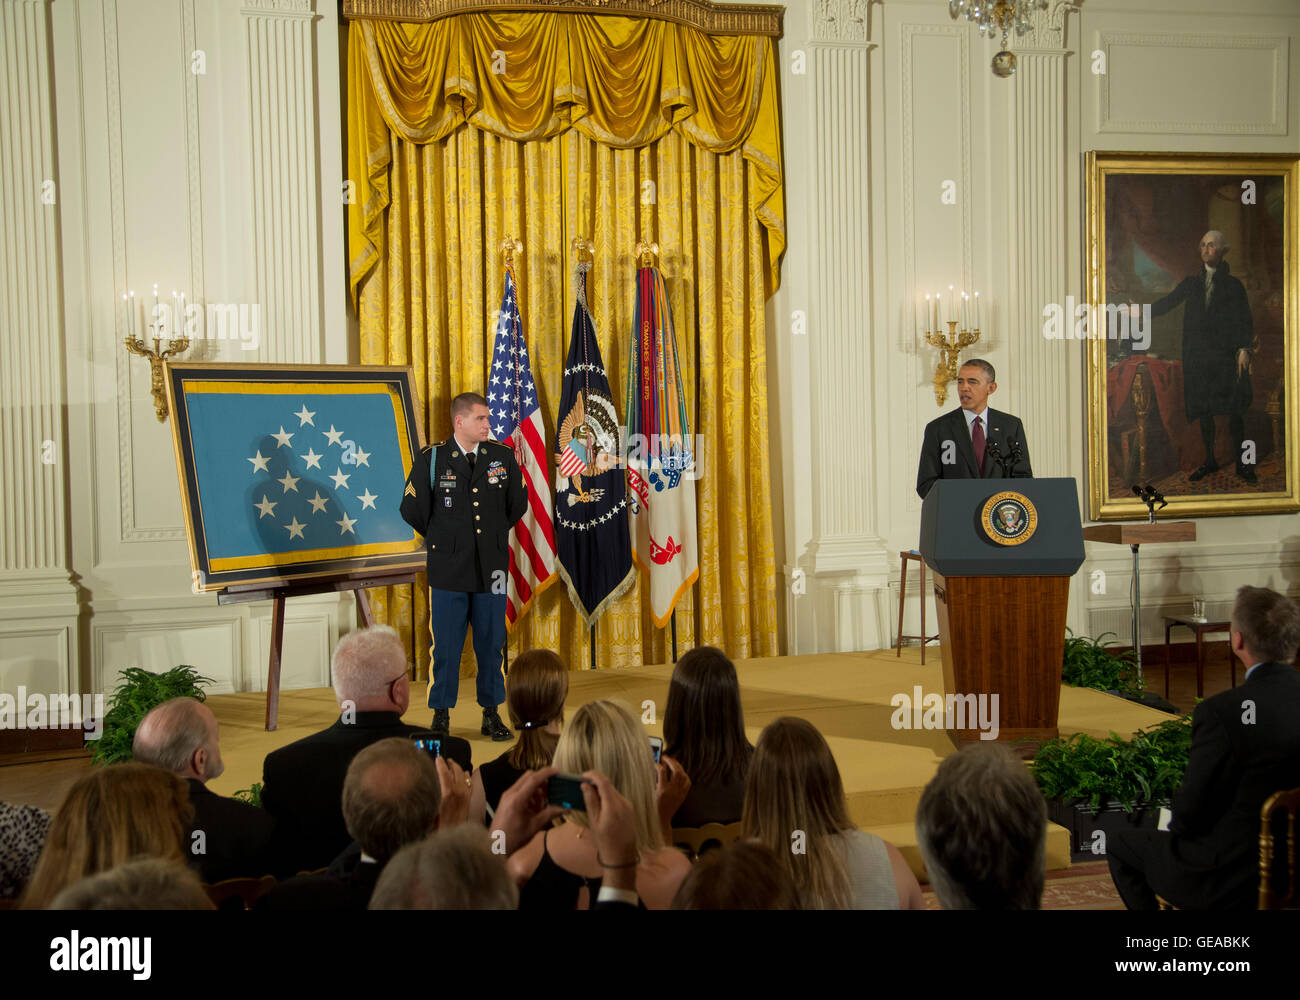 WASHINGTON, DC, May 13, 2014, President Barack Obama awards Kyle J. White, a former active duty Army Sergeant, the Medal of Honor for conspicuous gallantry.  Sergeant White will receive the Medal of Honor for his courageous actions while serving as a Platoon Radio Telephone Operator assigned to C Company, 2nd Battalion (Airborne), 503rd Infantry Regiment, 173rd Airborne Brigade, during combat operations against an armed enemy in Nuristan Province, Afghanistan on November 9, 2007.  Sergeant White will be the seventh living recipient to be awarded the Medal of Honor for actions in Iraq or Afghan Stock Photo